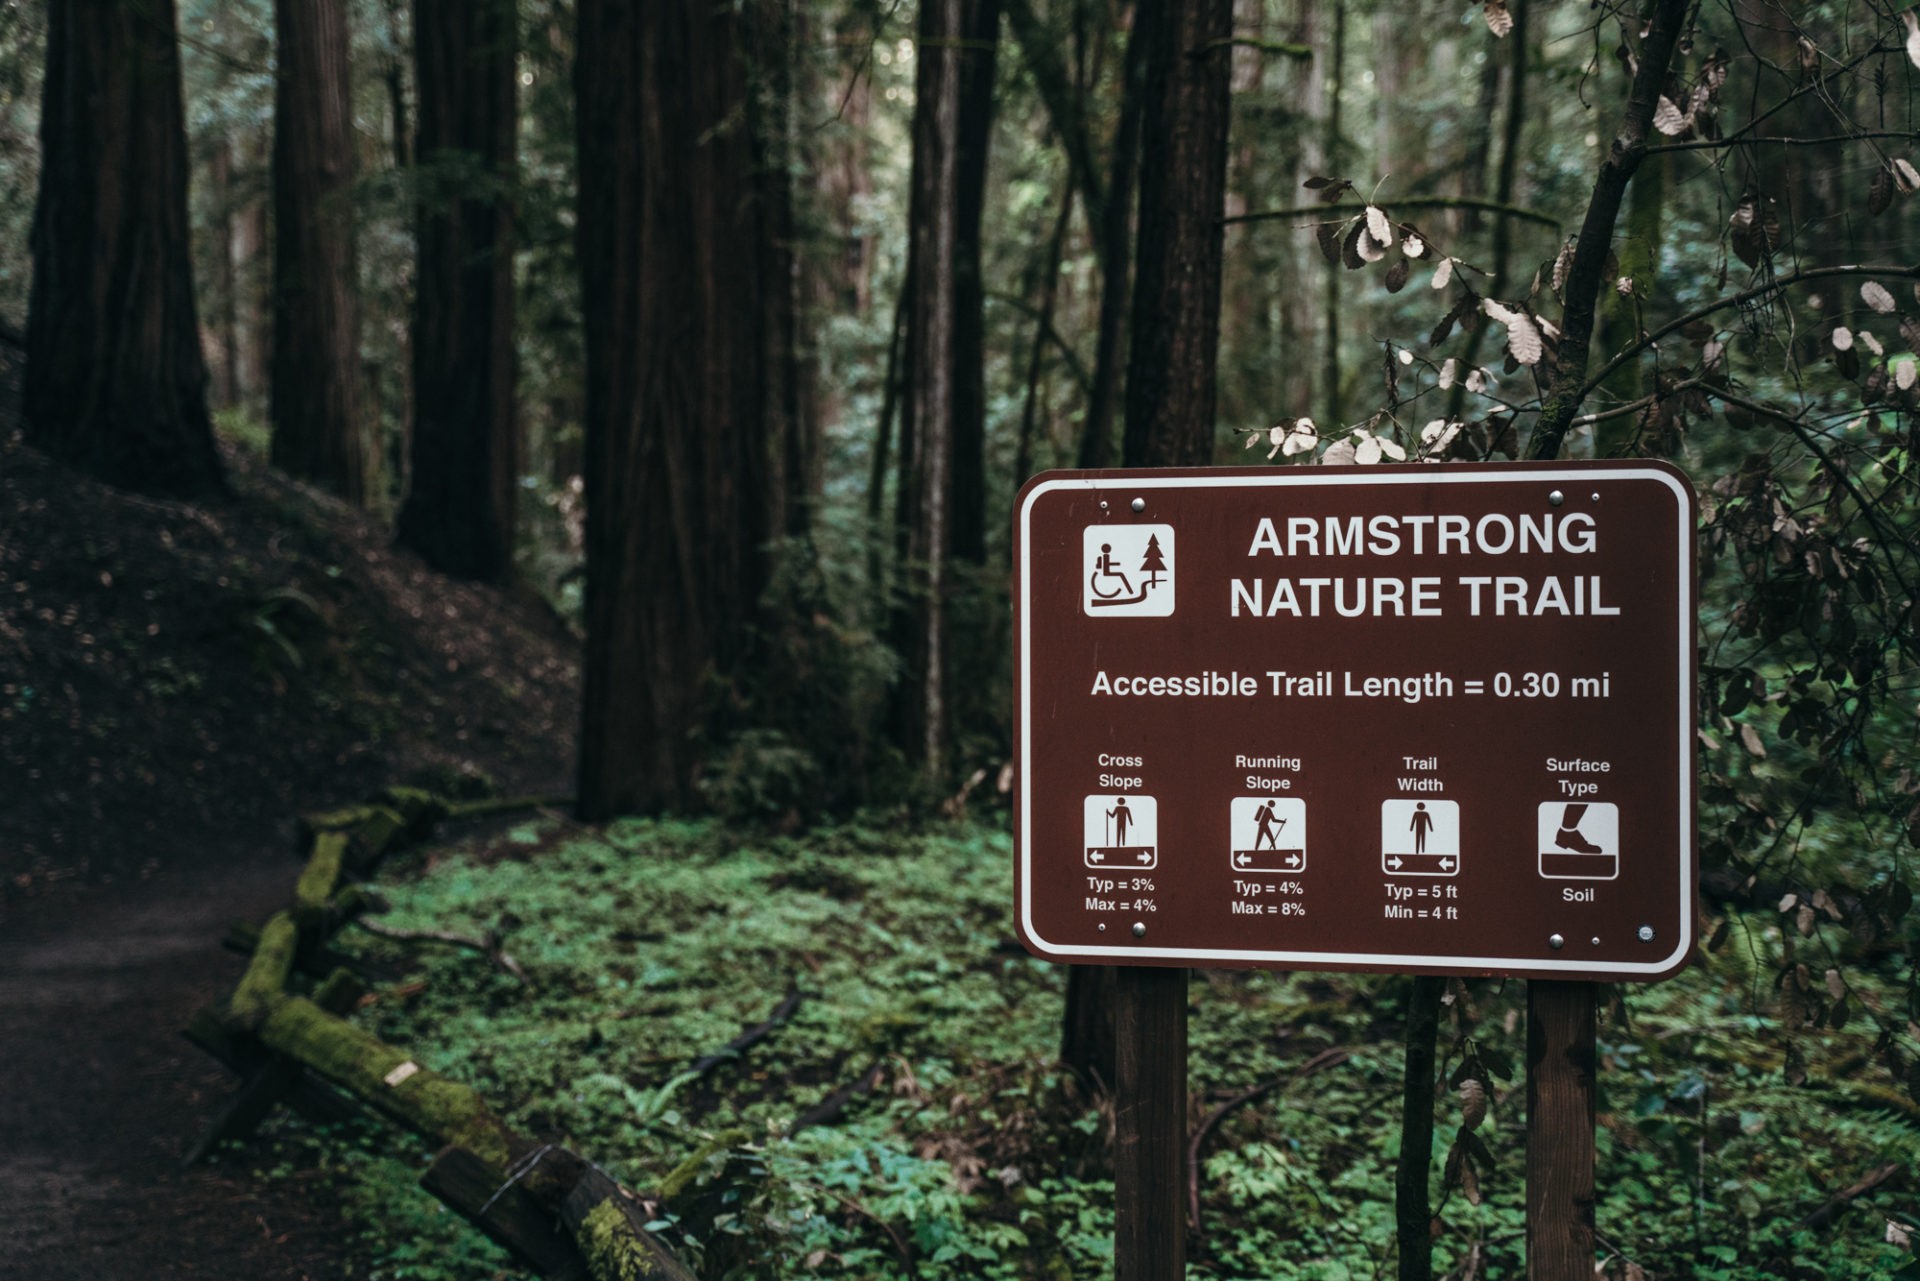 Armstrong Nature Trail at at the Armstrong Redwoods Reserve